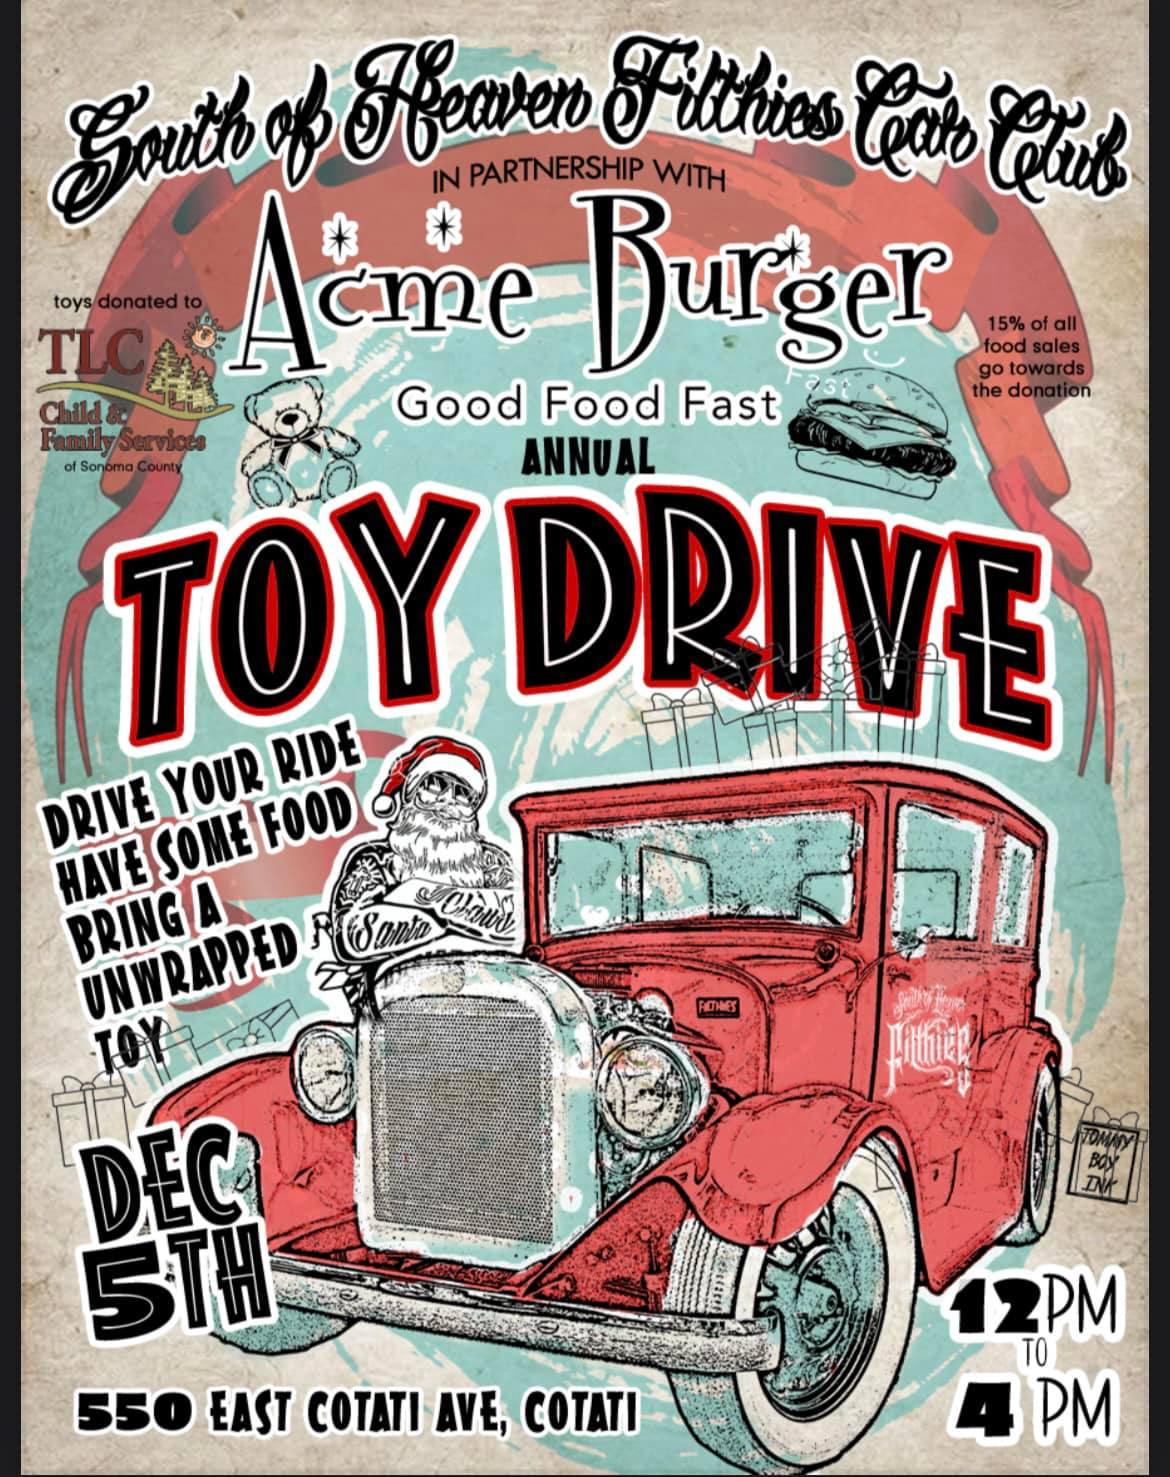 South of Heaven Filthies Toy Drive